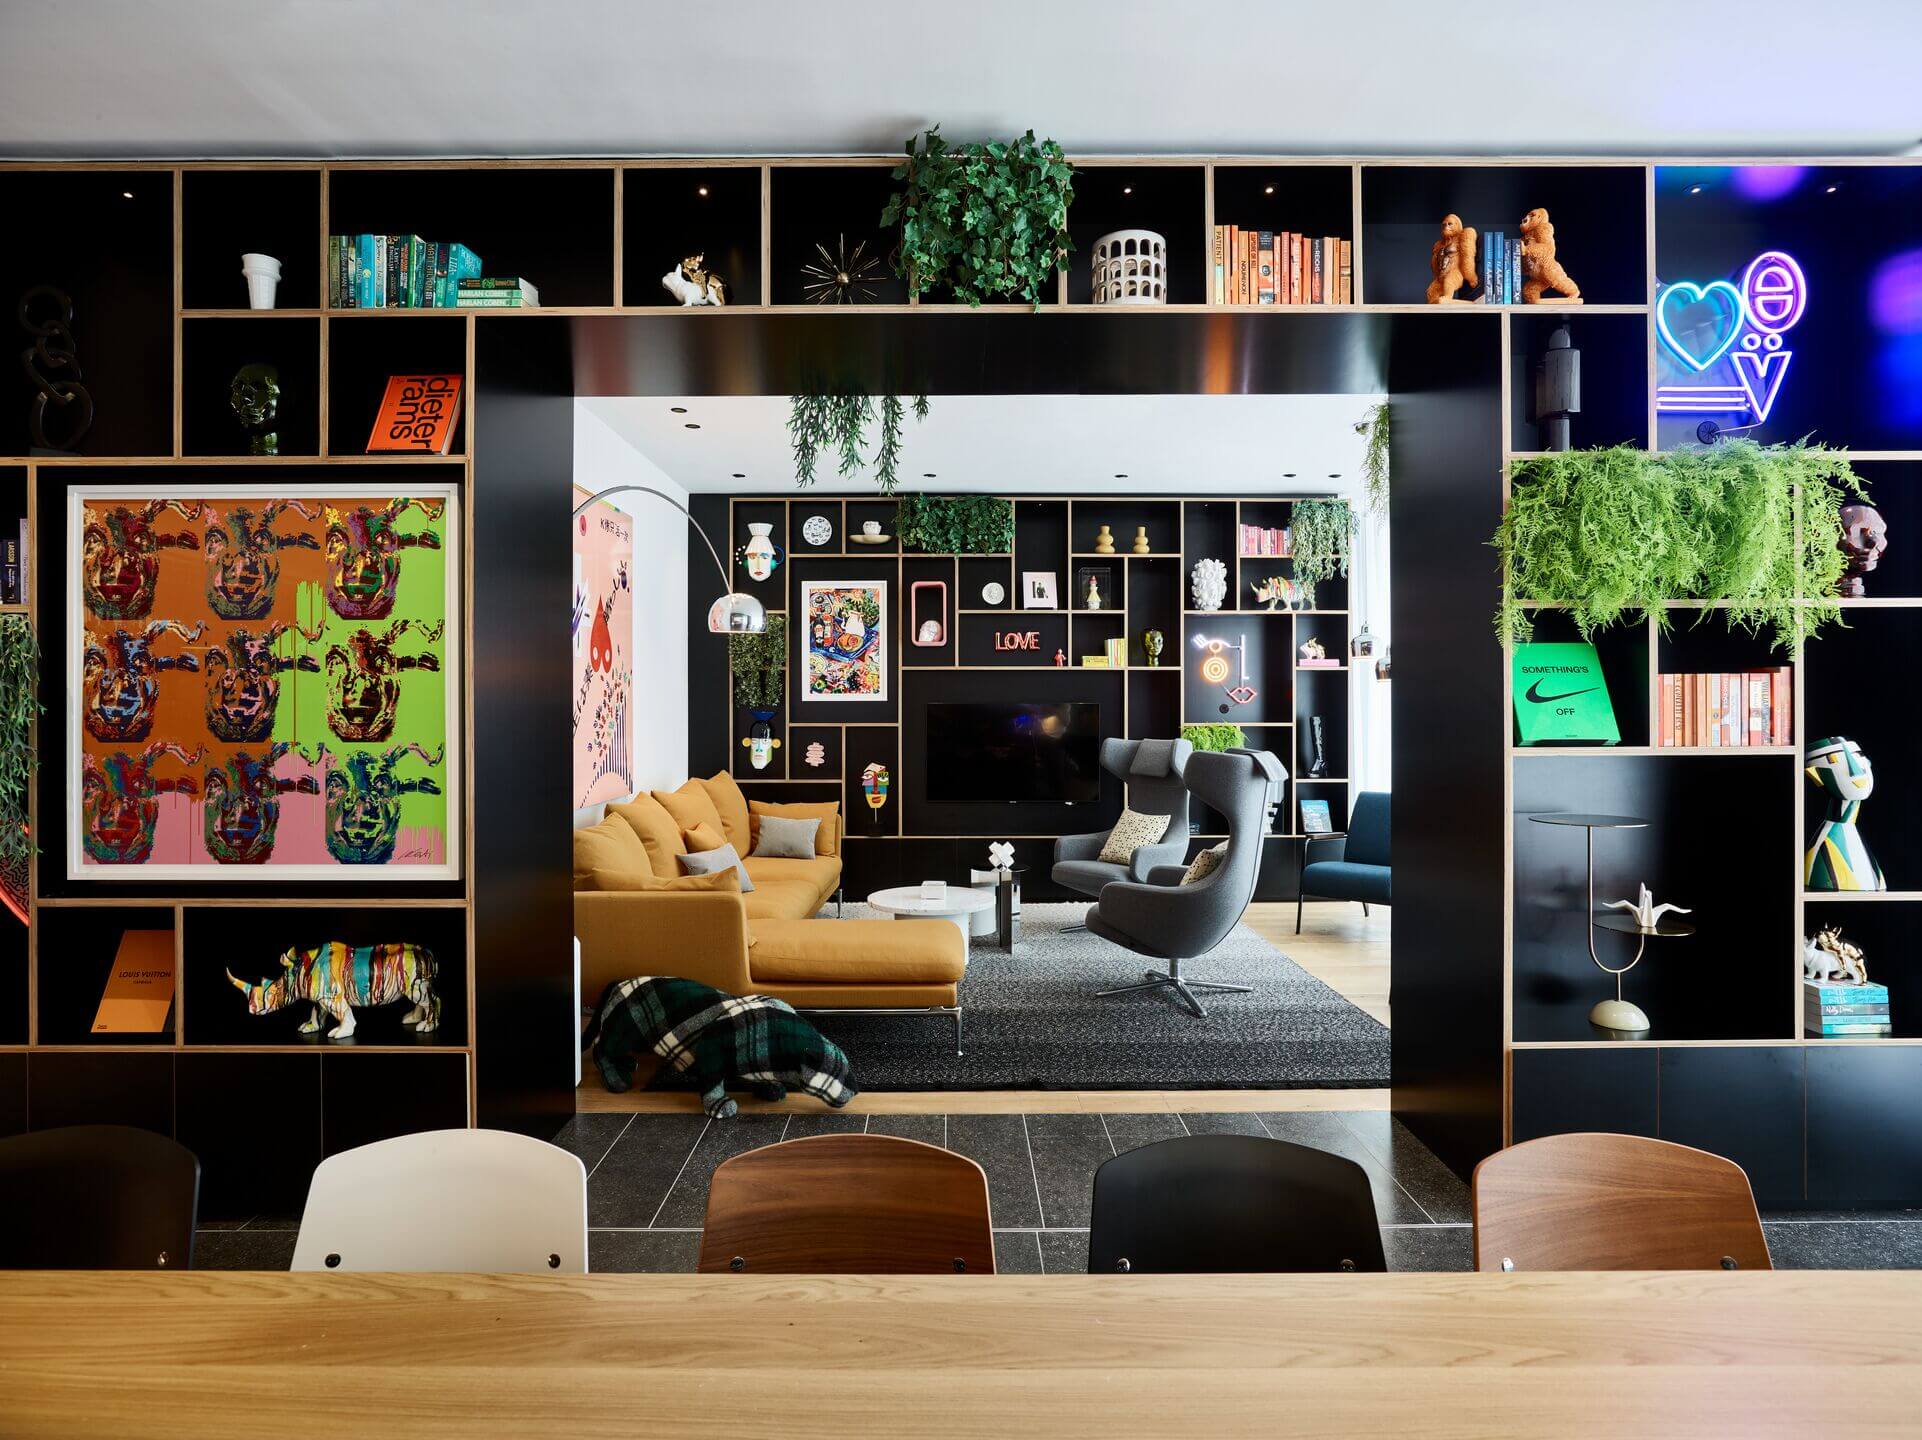 interior of Citizen M hotel in London's Victoria - a free place for co-working